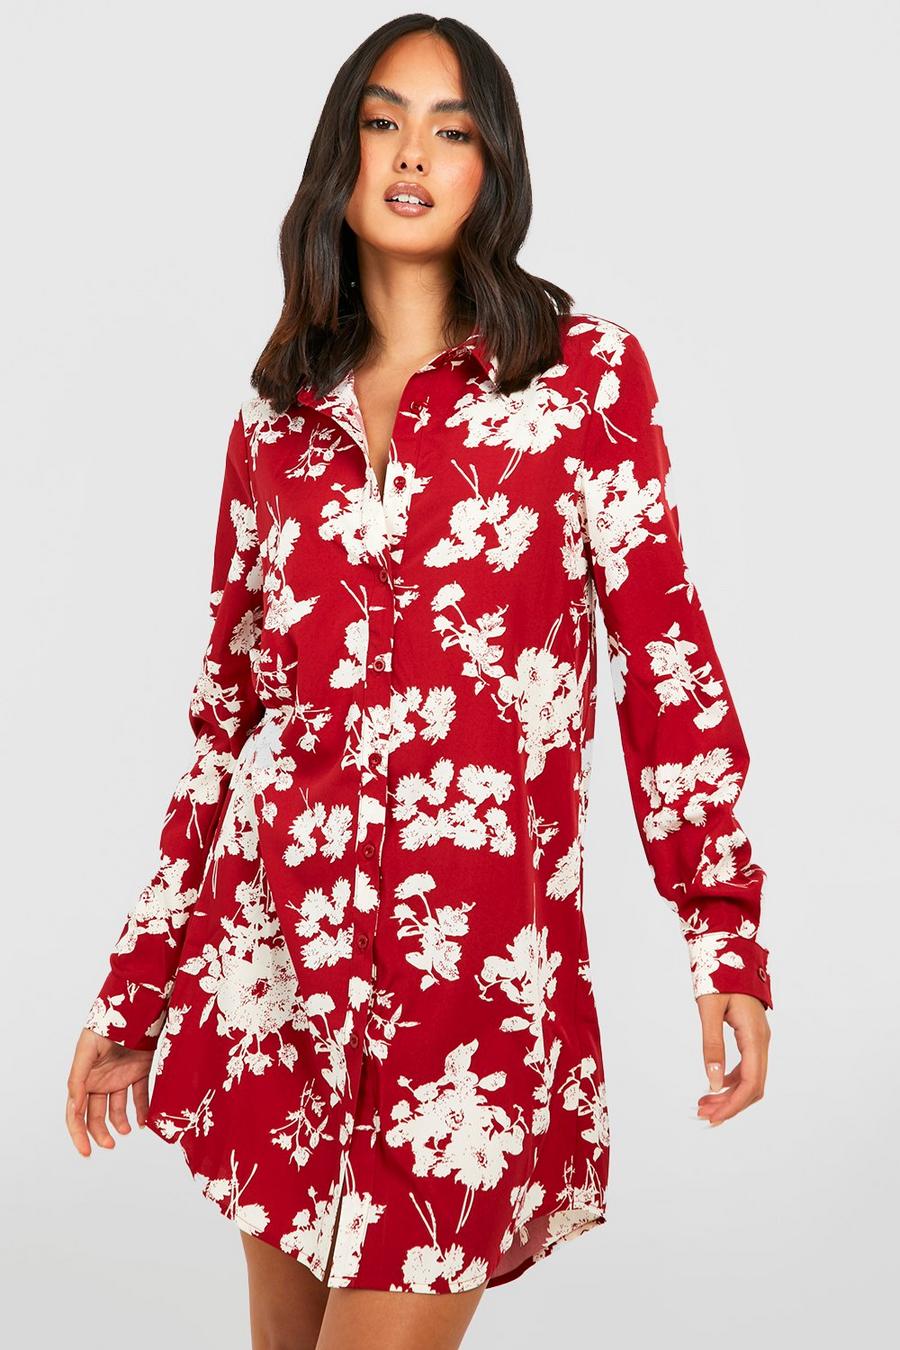 New In Dresses | All New In Dresses | boohoo Canada